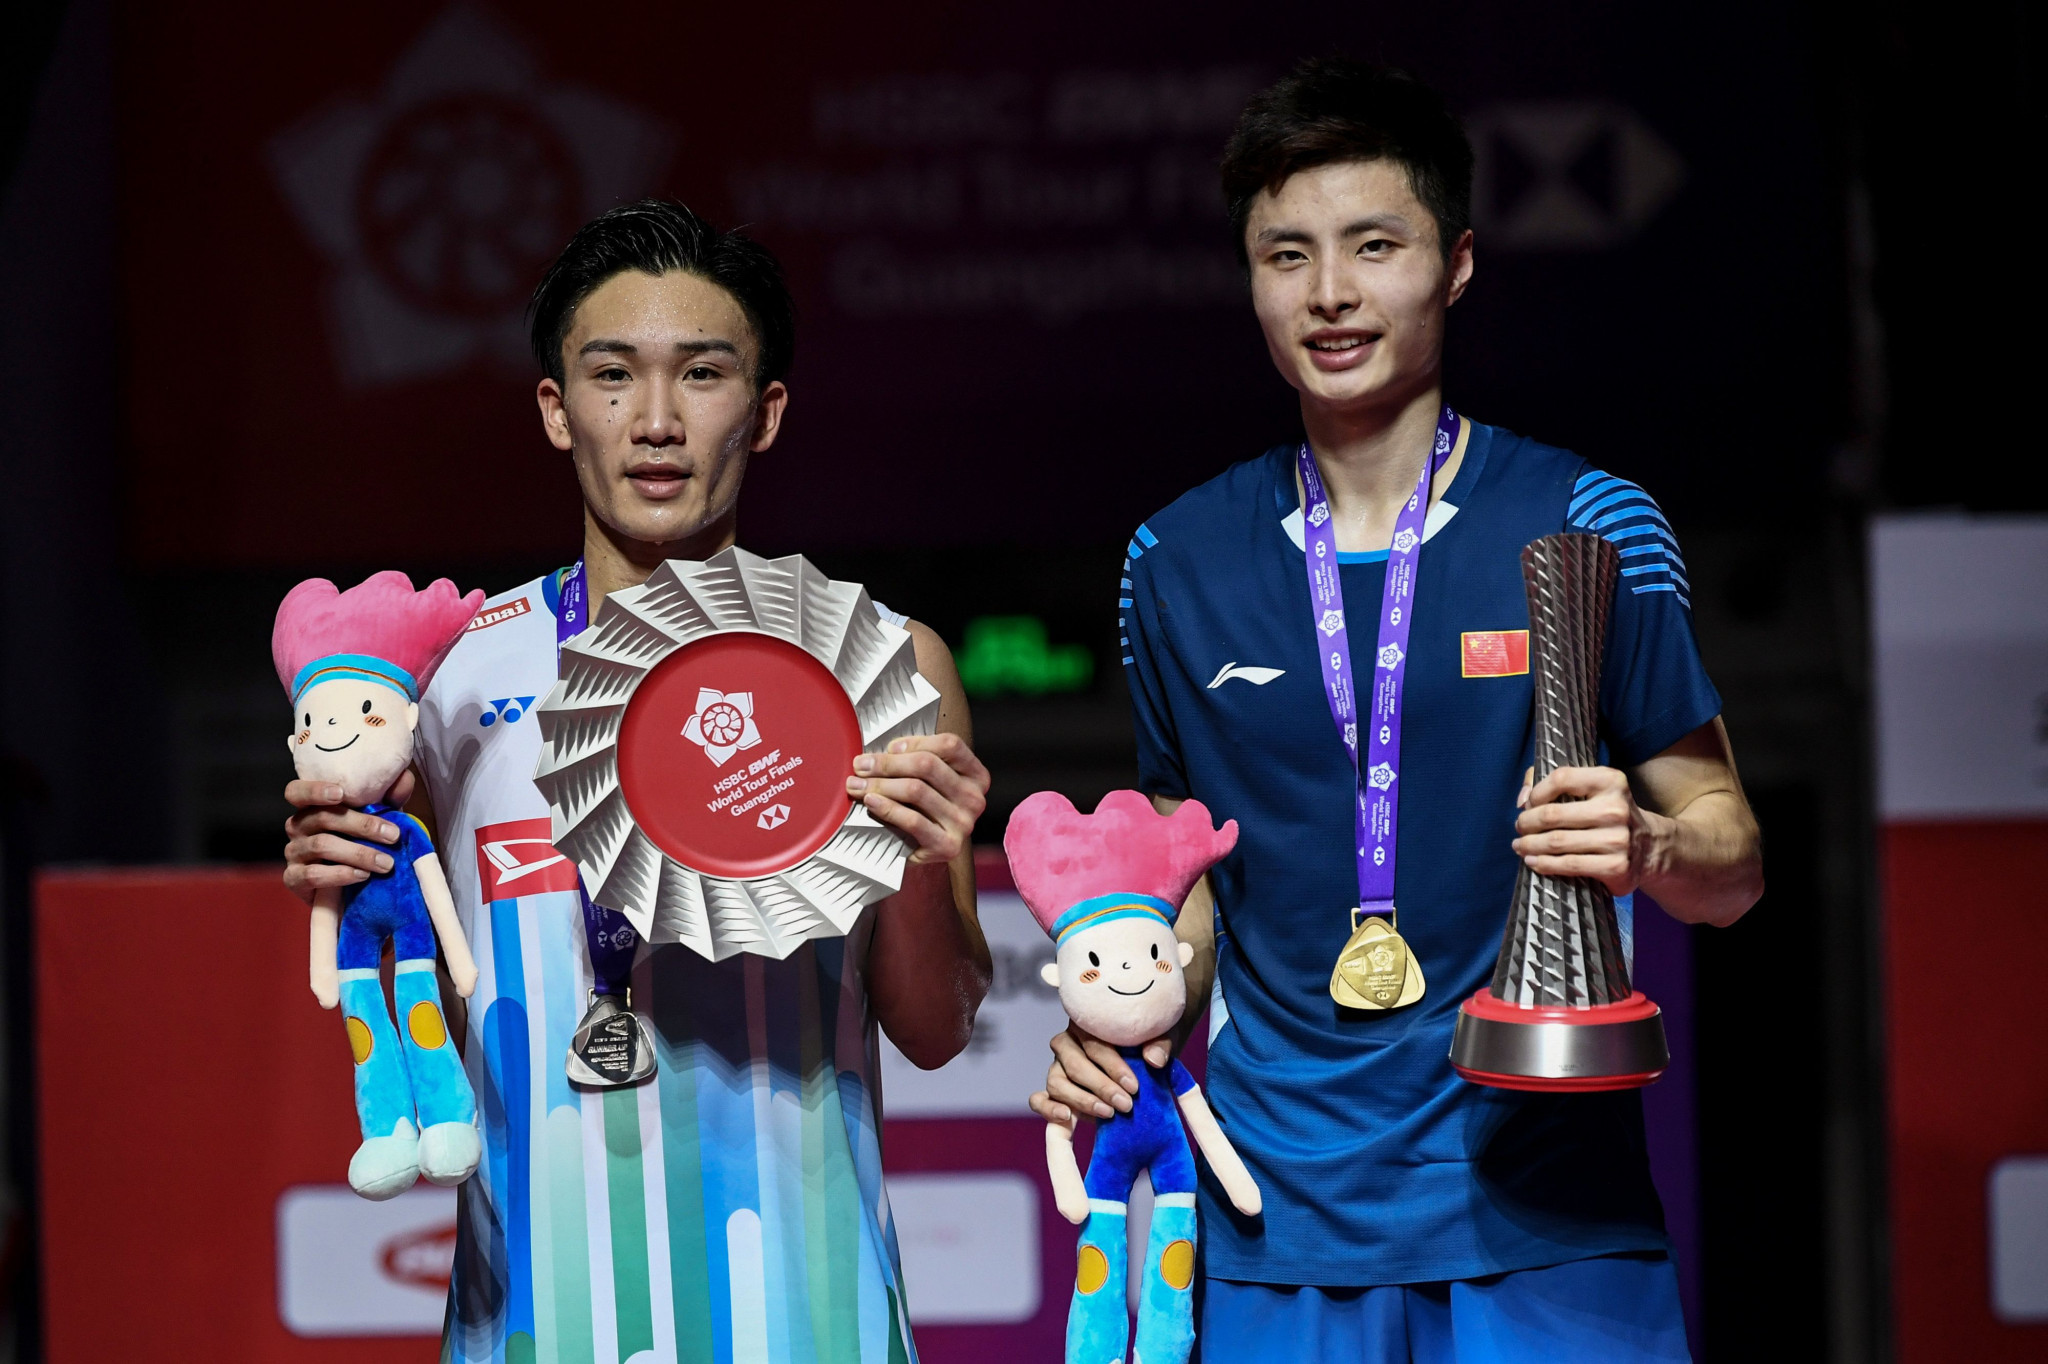 Kento Momota, left, and Shi Yuqi, right, could meet once again in the final of the BWF Malaysia Open ©Getty Images